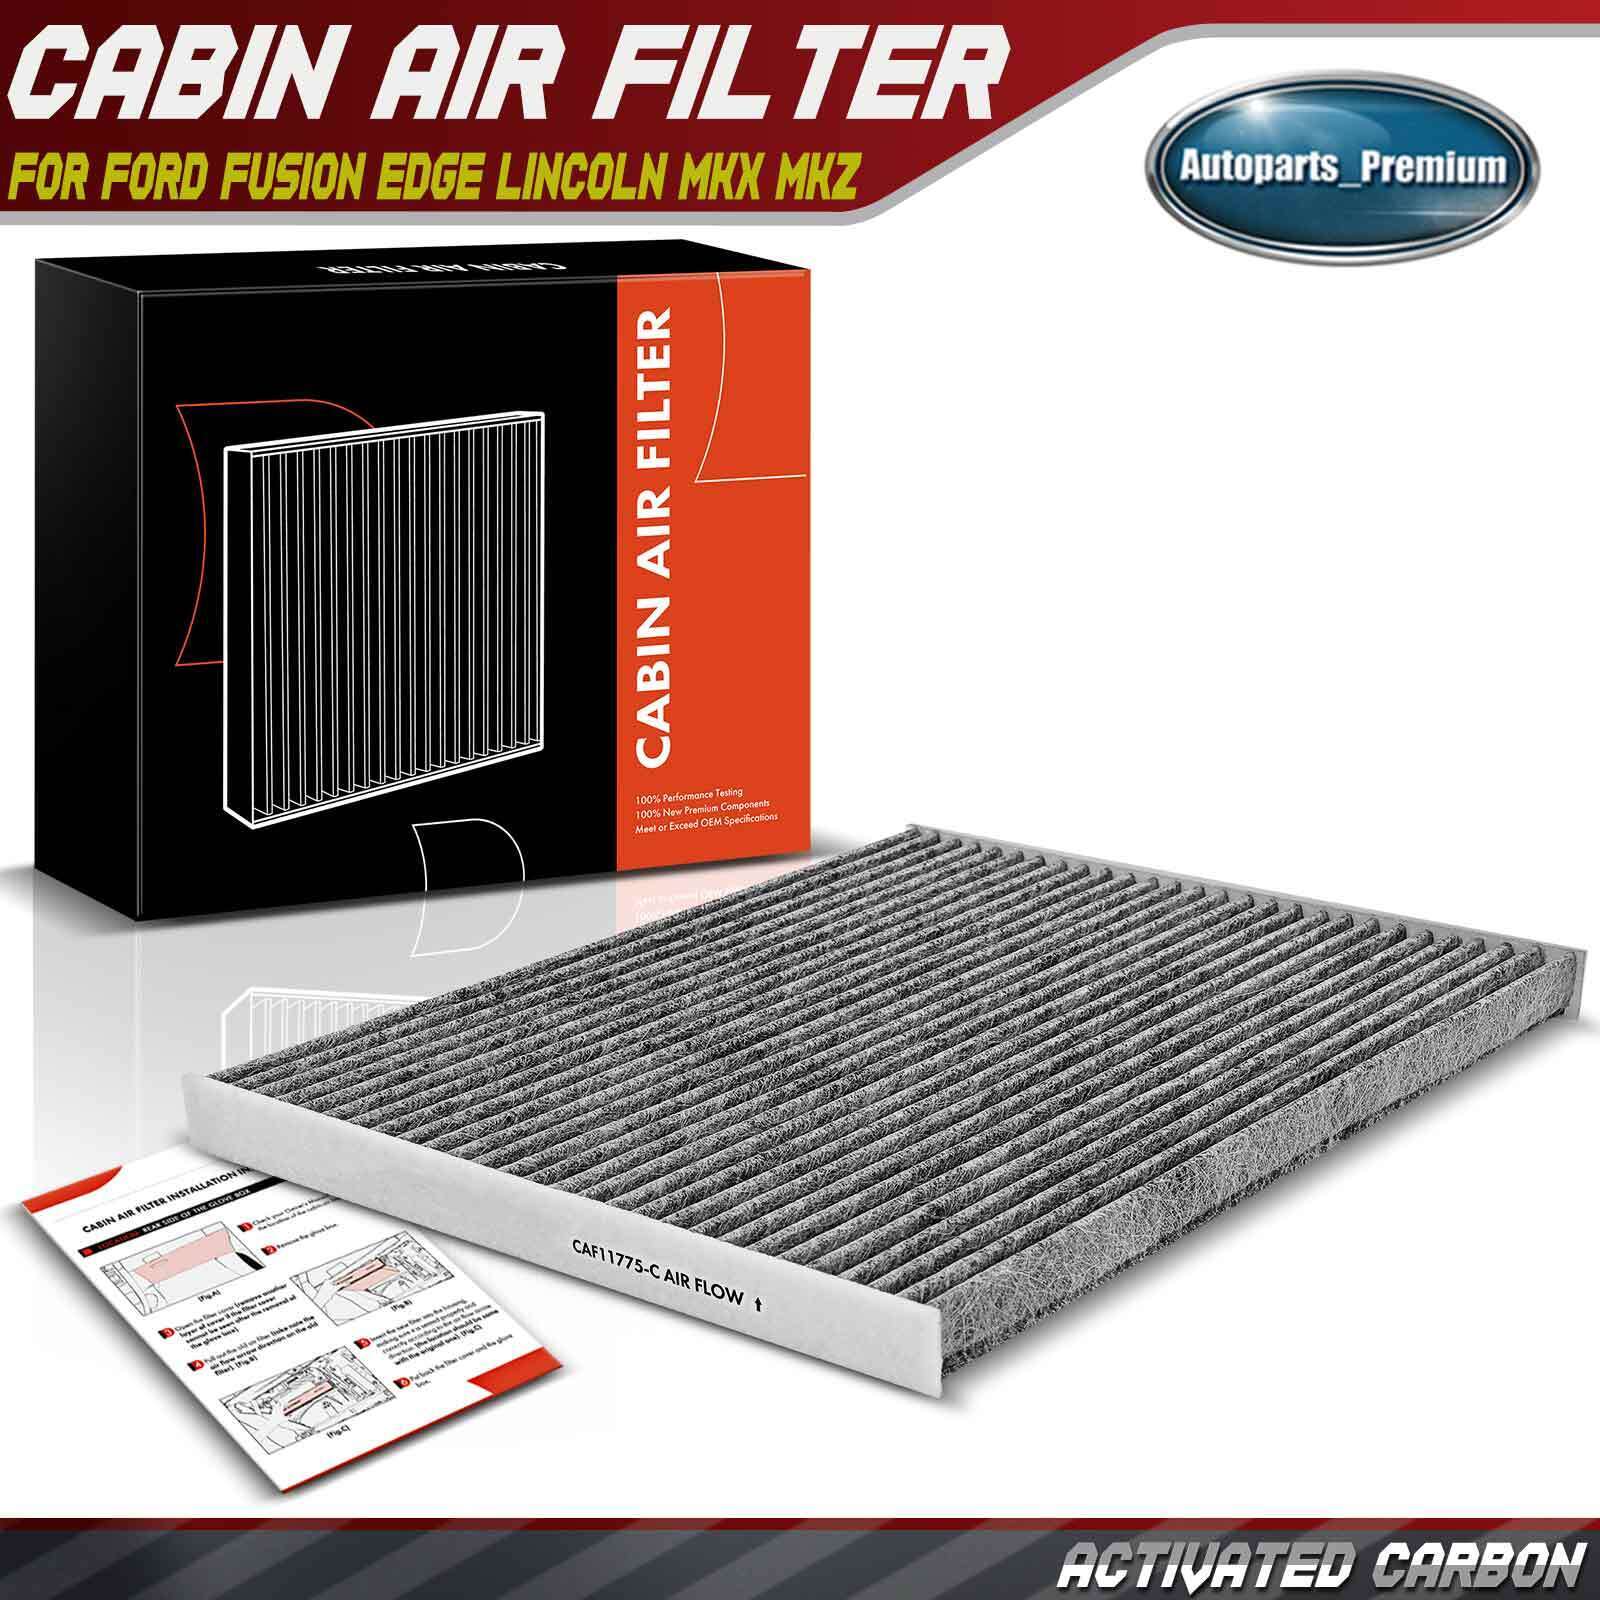 Activated Carbon Cabin Air Filter for Ford Fusion Edge Lincoln Continental MKX